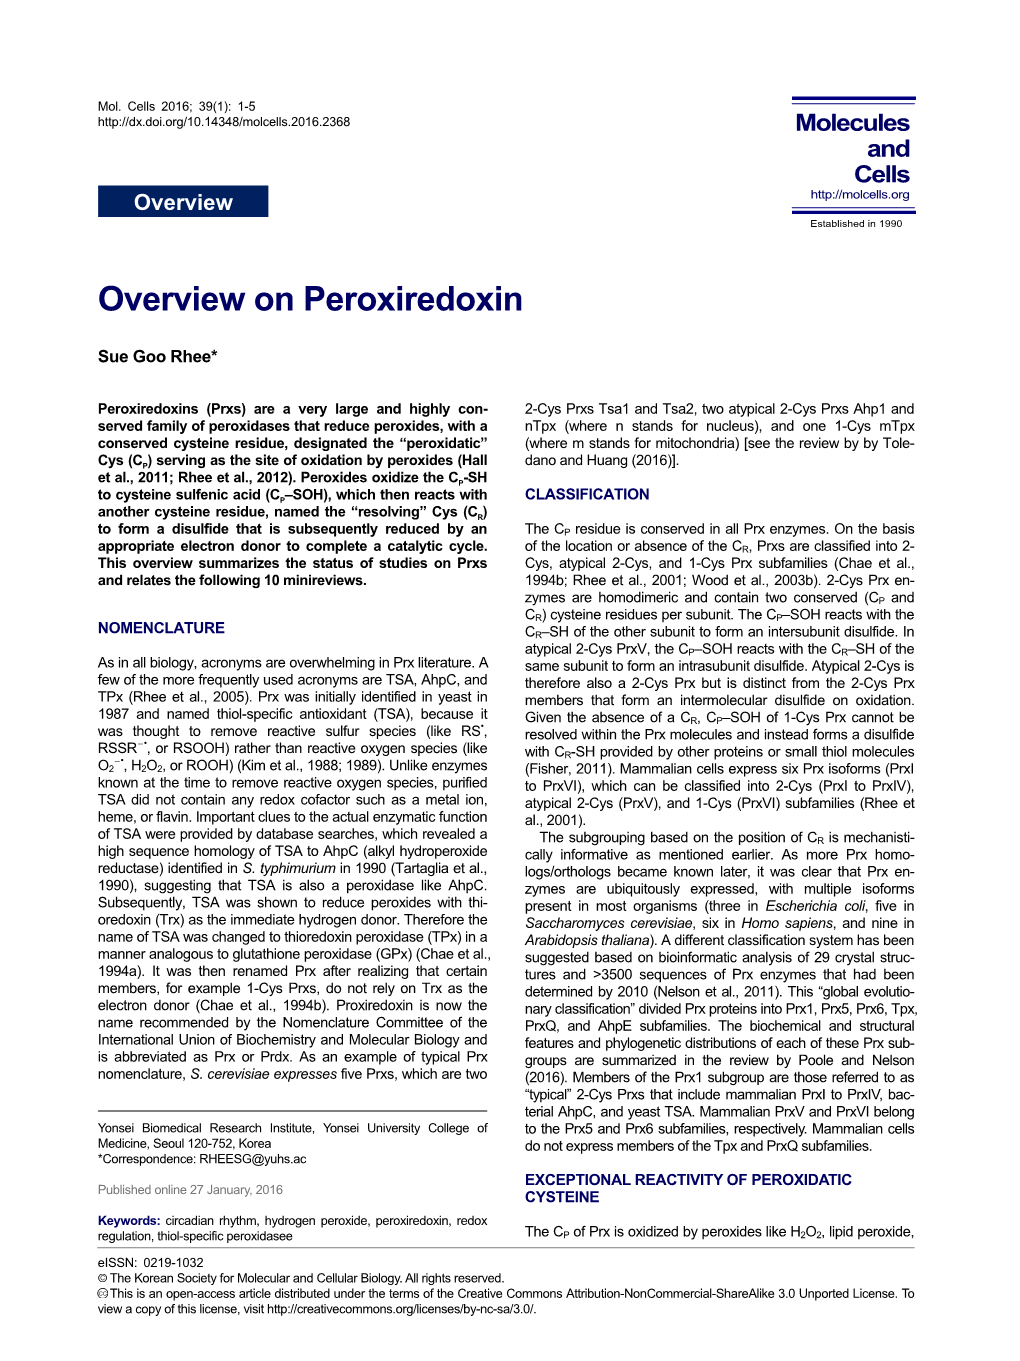 Overview on Peroxiredoxin